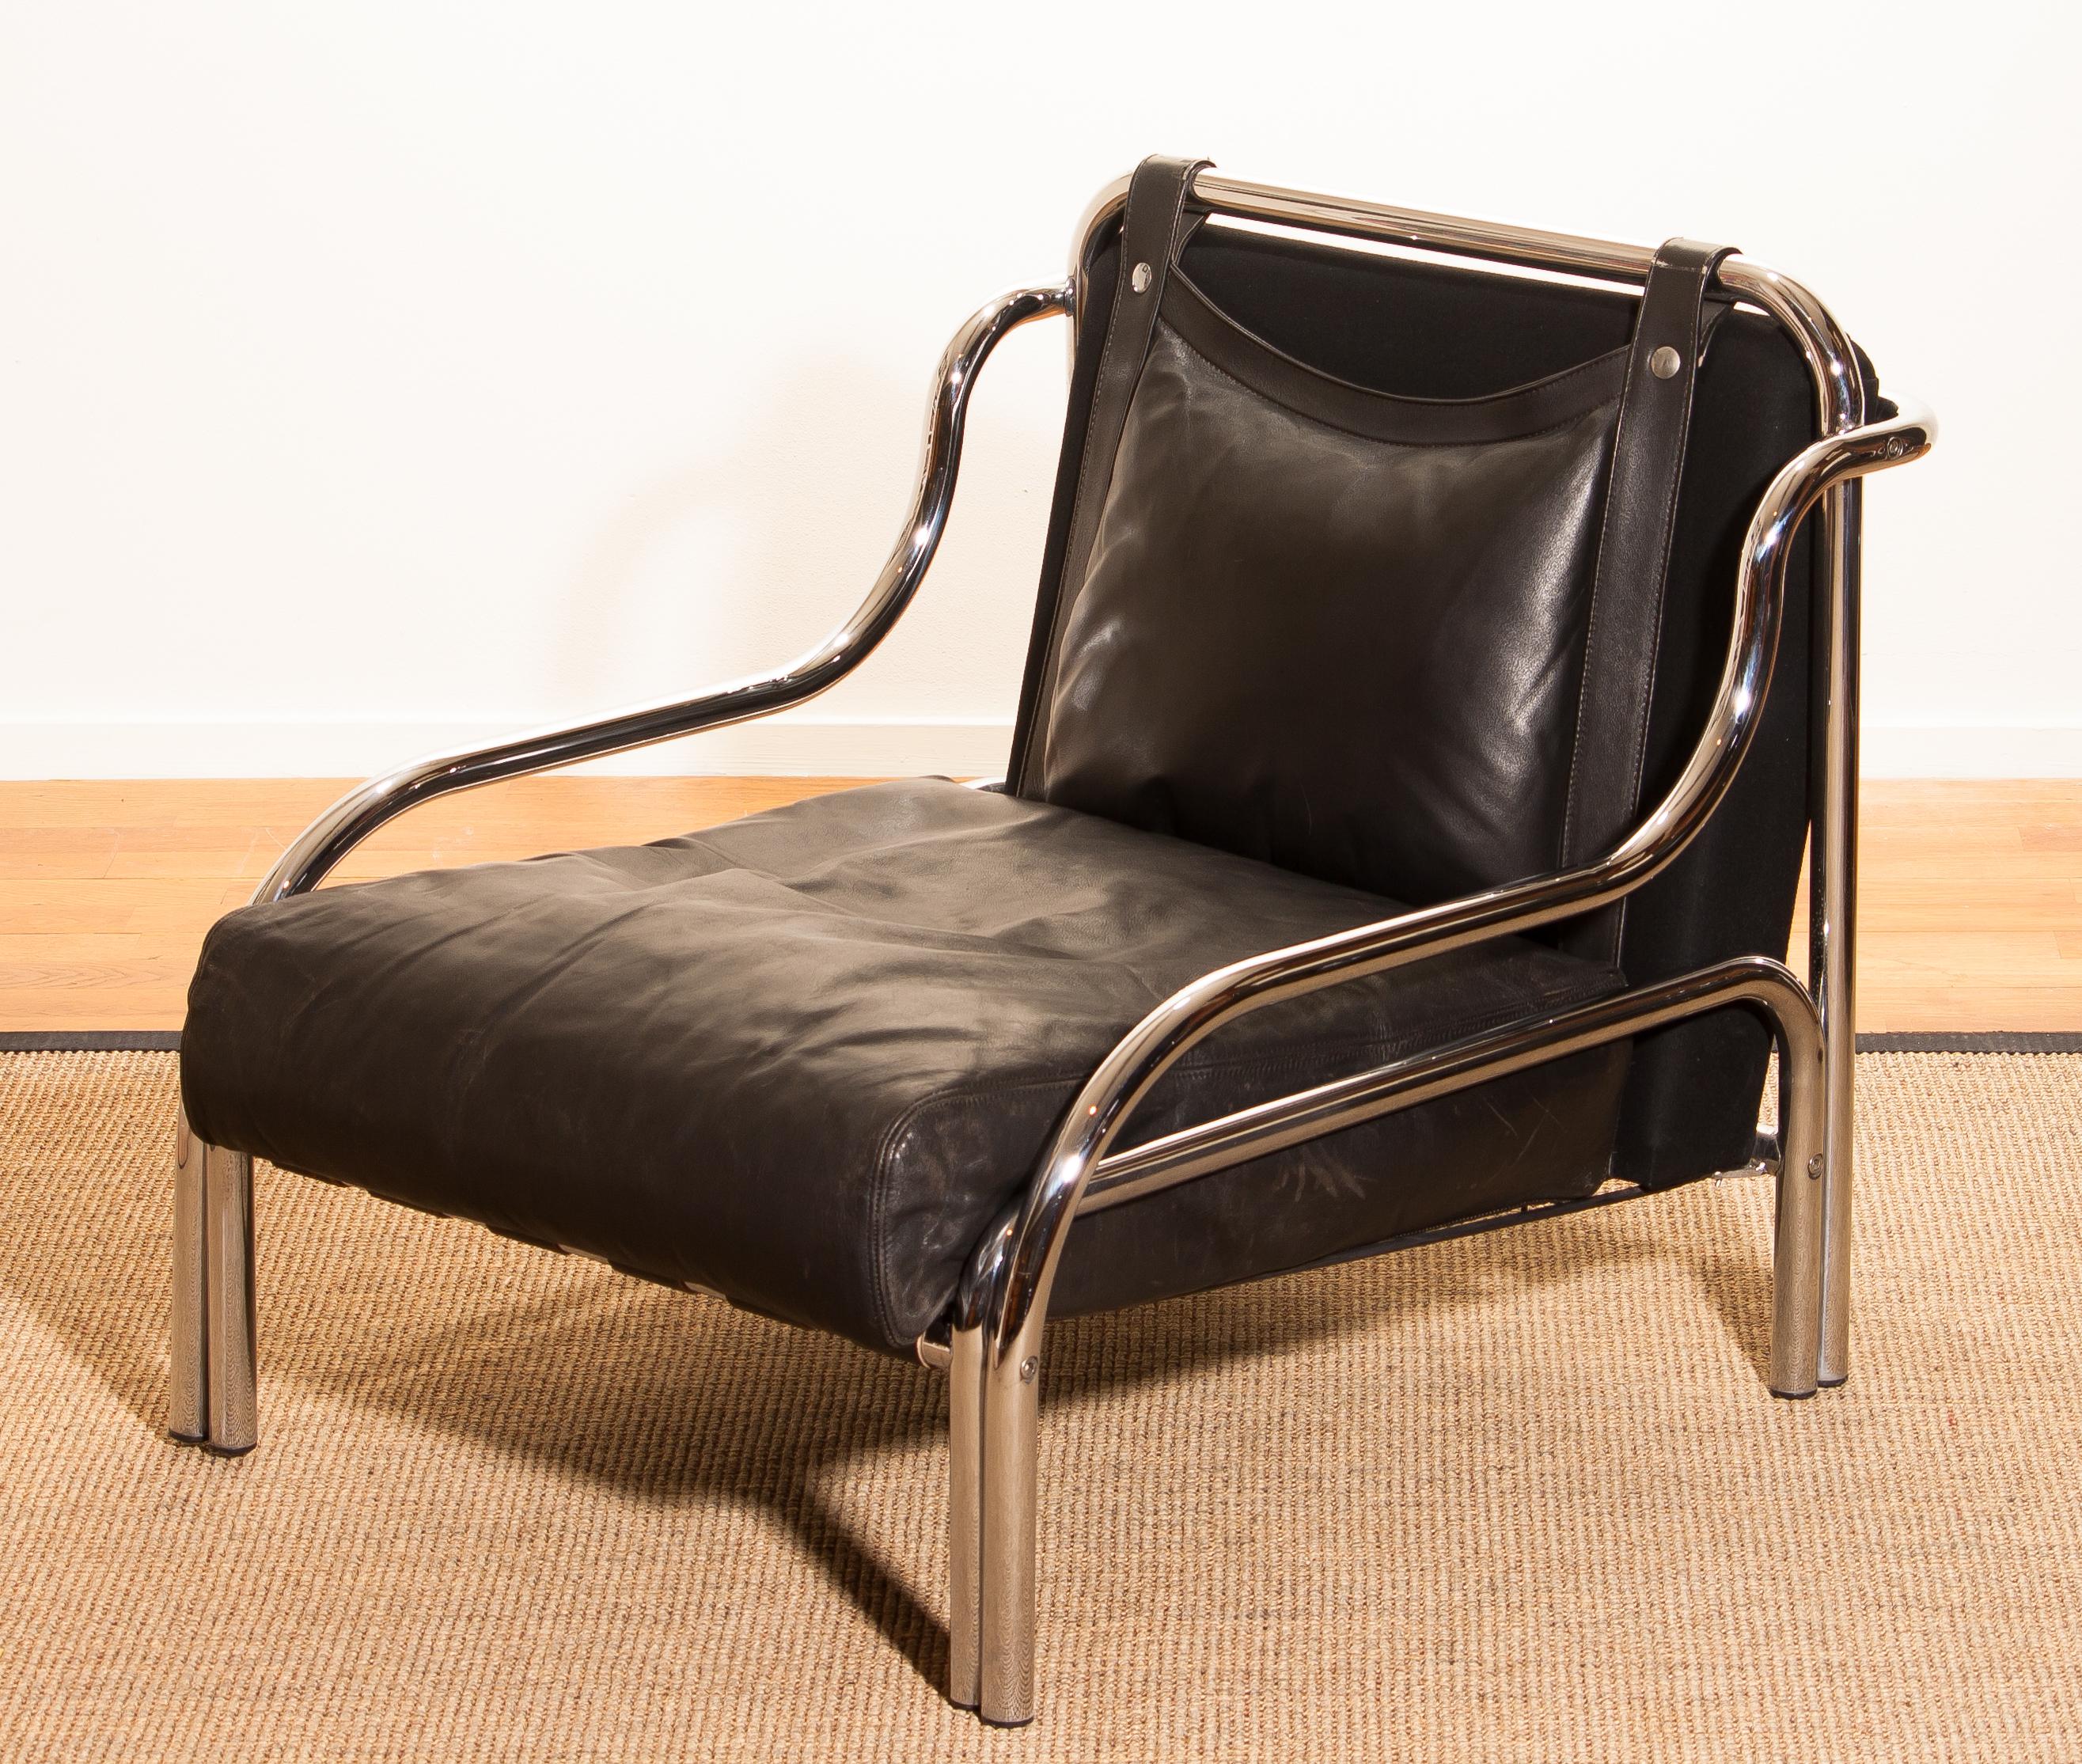 1960s Leather and Chrome Lounge Chair by Gae Aulenti for Poltronova In Excellent Condition In Silvolde, Gelderland